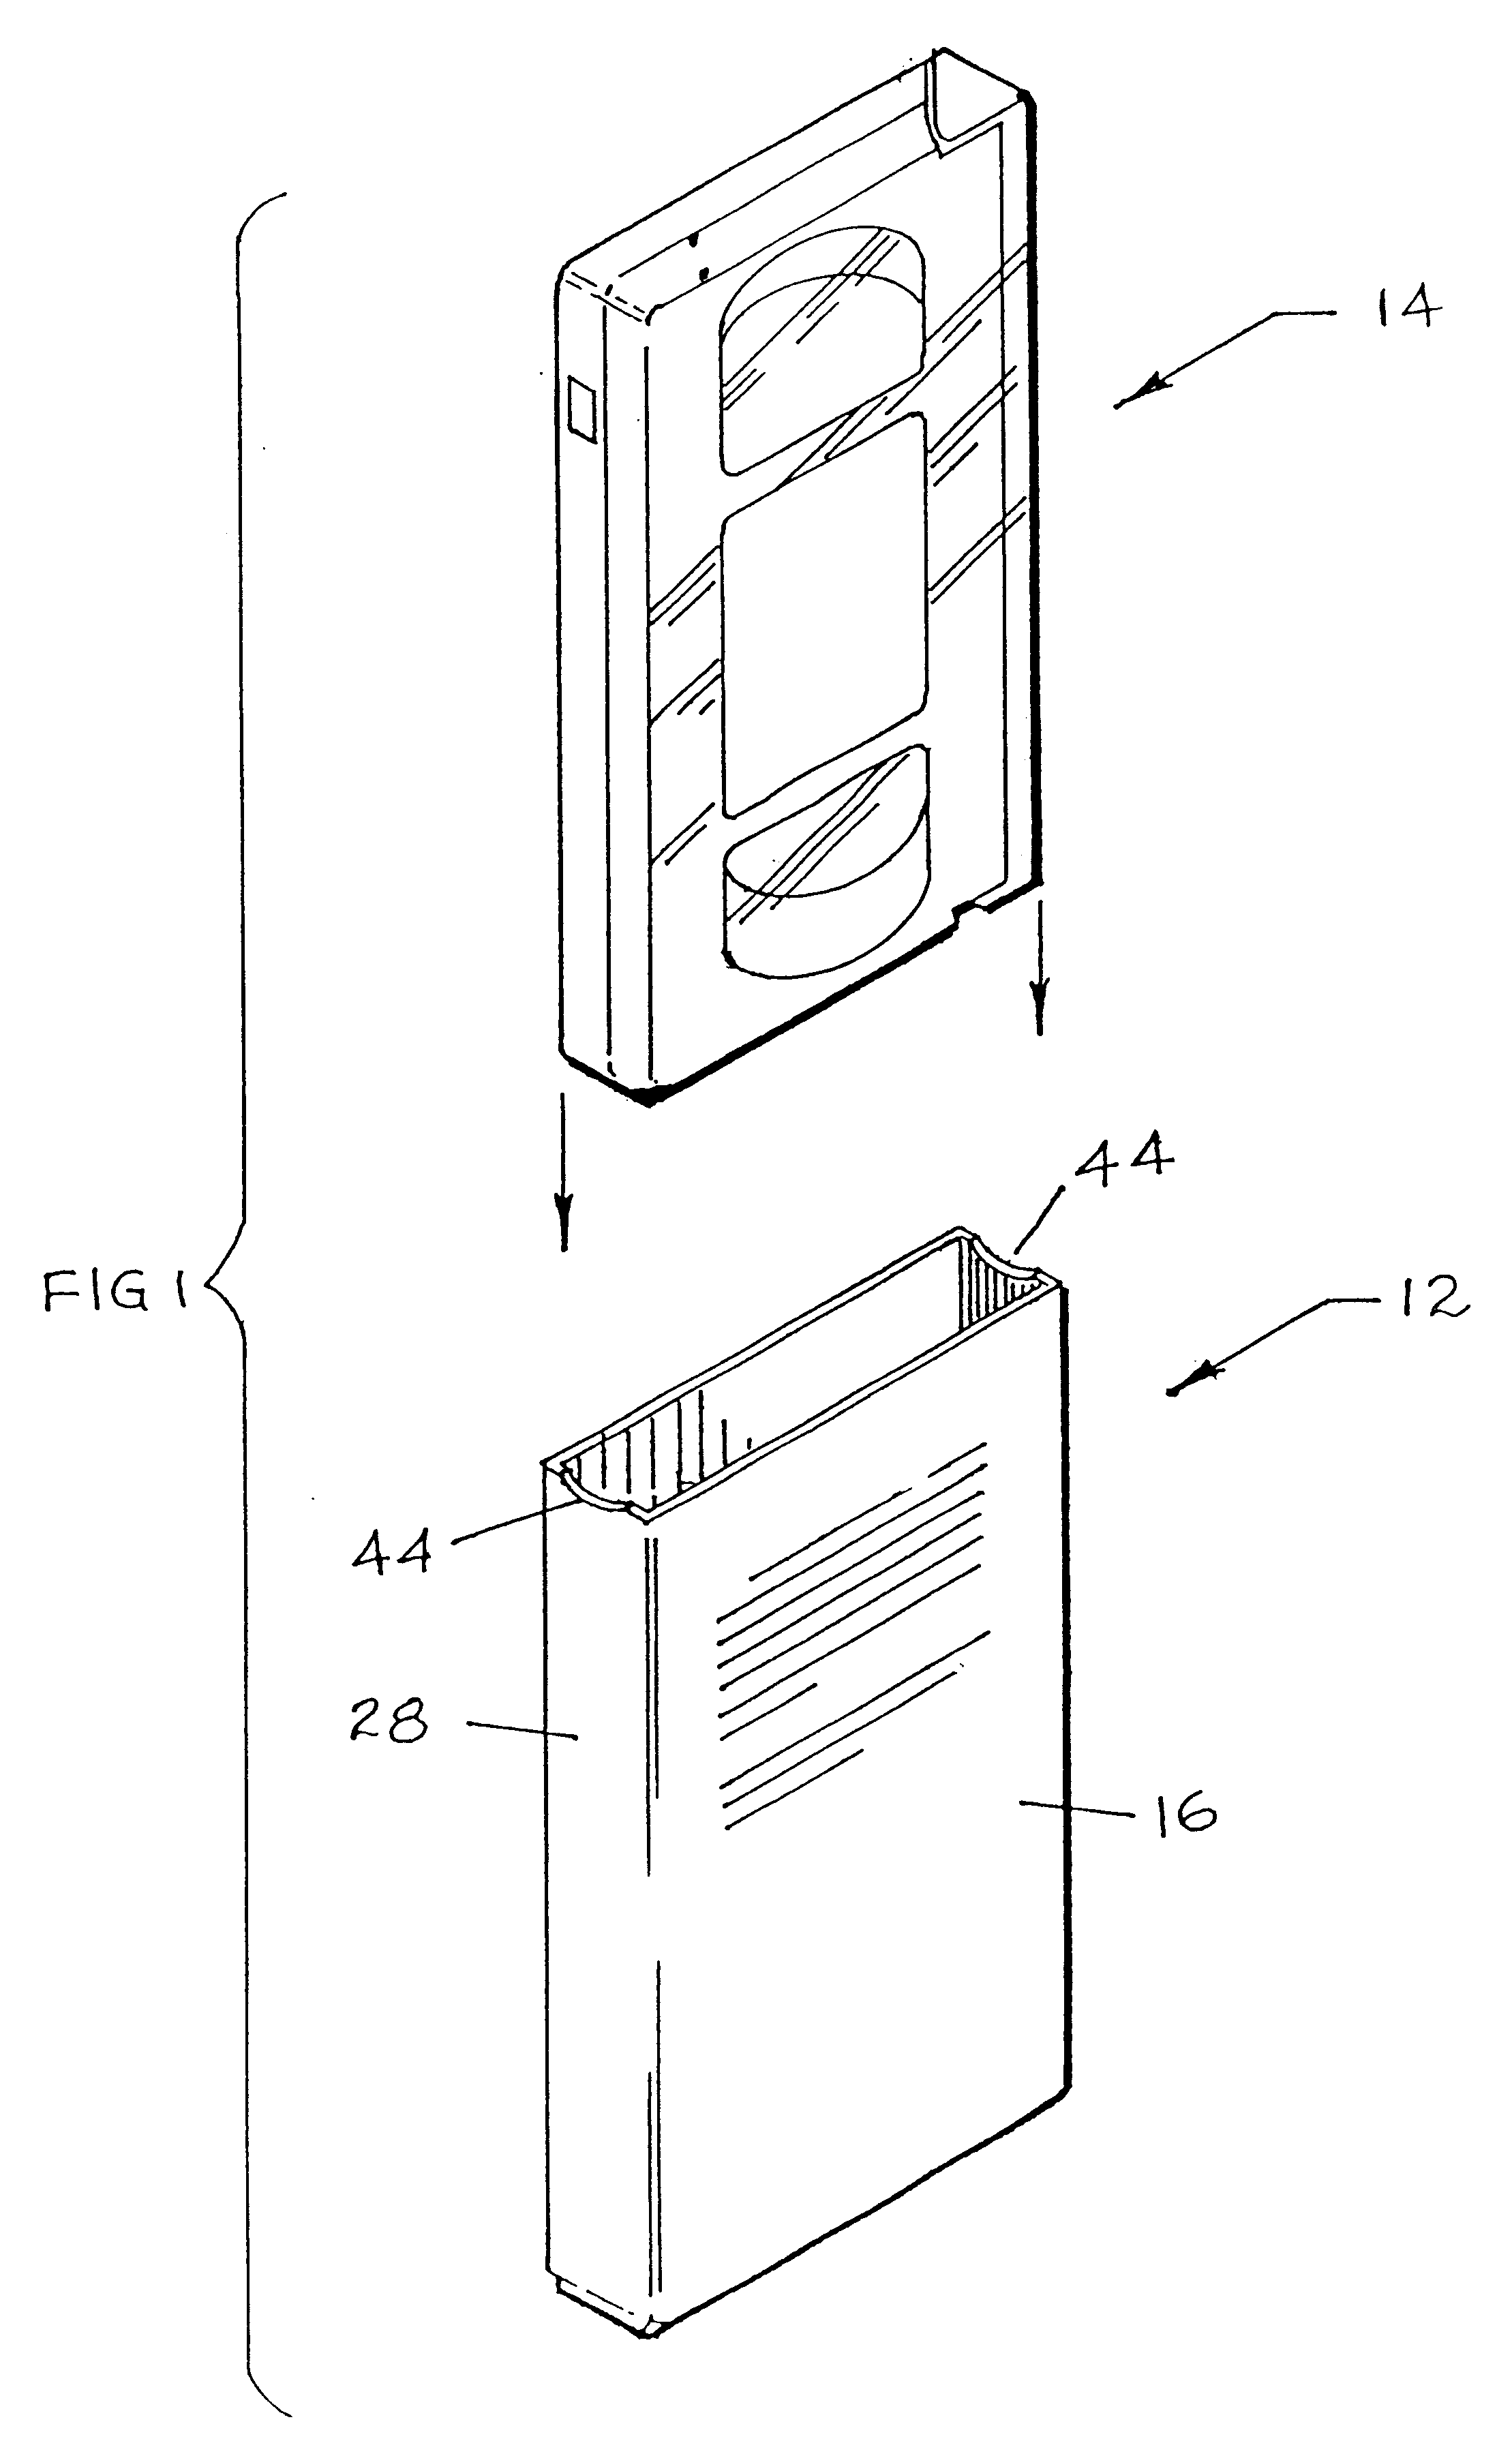 Printable blank for forming video cassette boxes